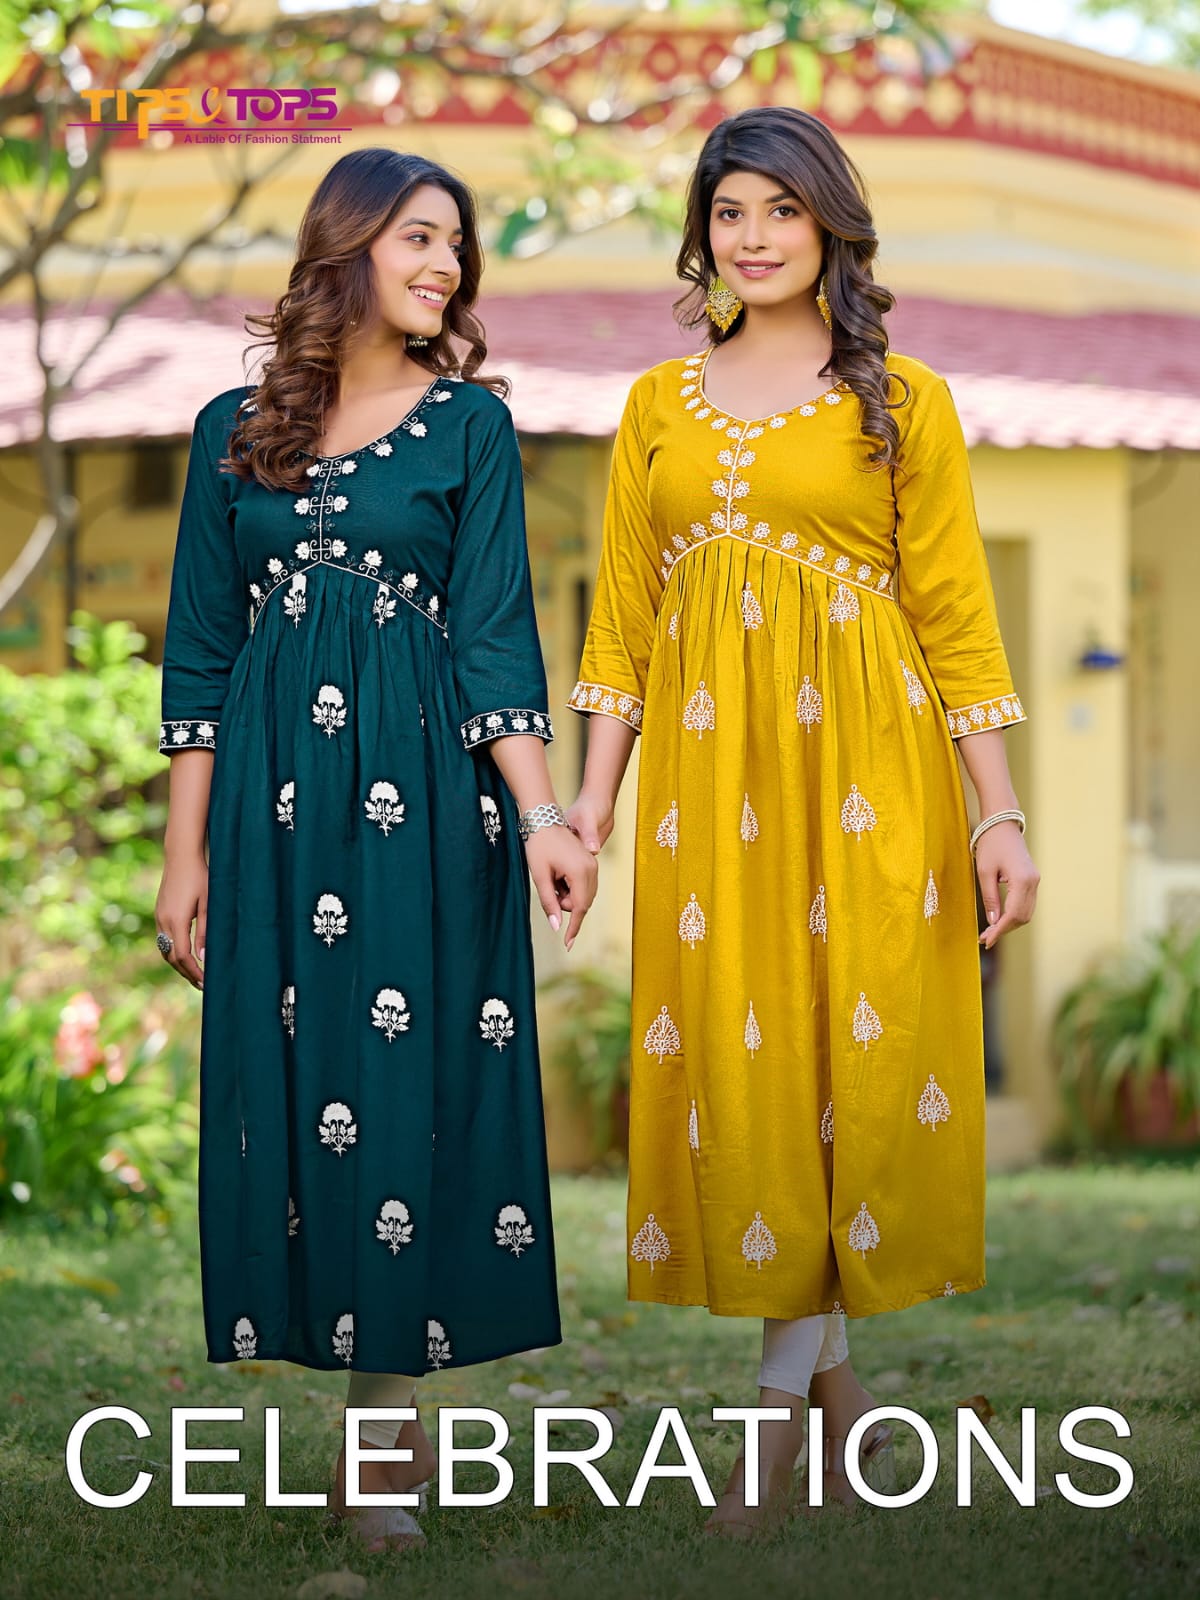 CELEBRATIONS BY TIPS TOPS ALIA CUT LATEST COLLECTIONS KURTIS 1 1